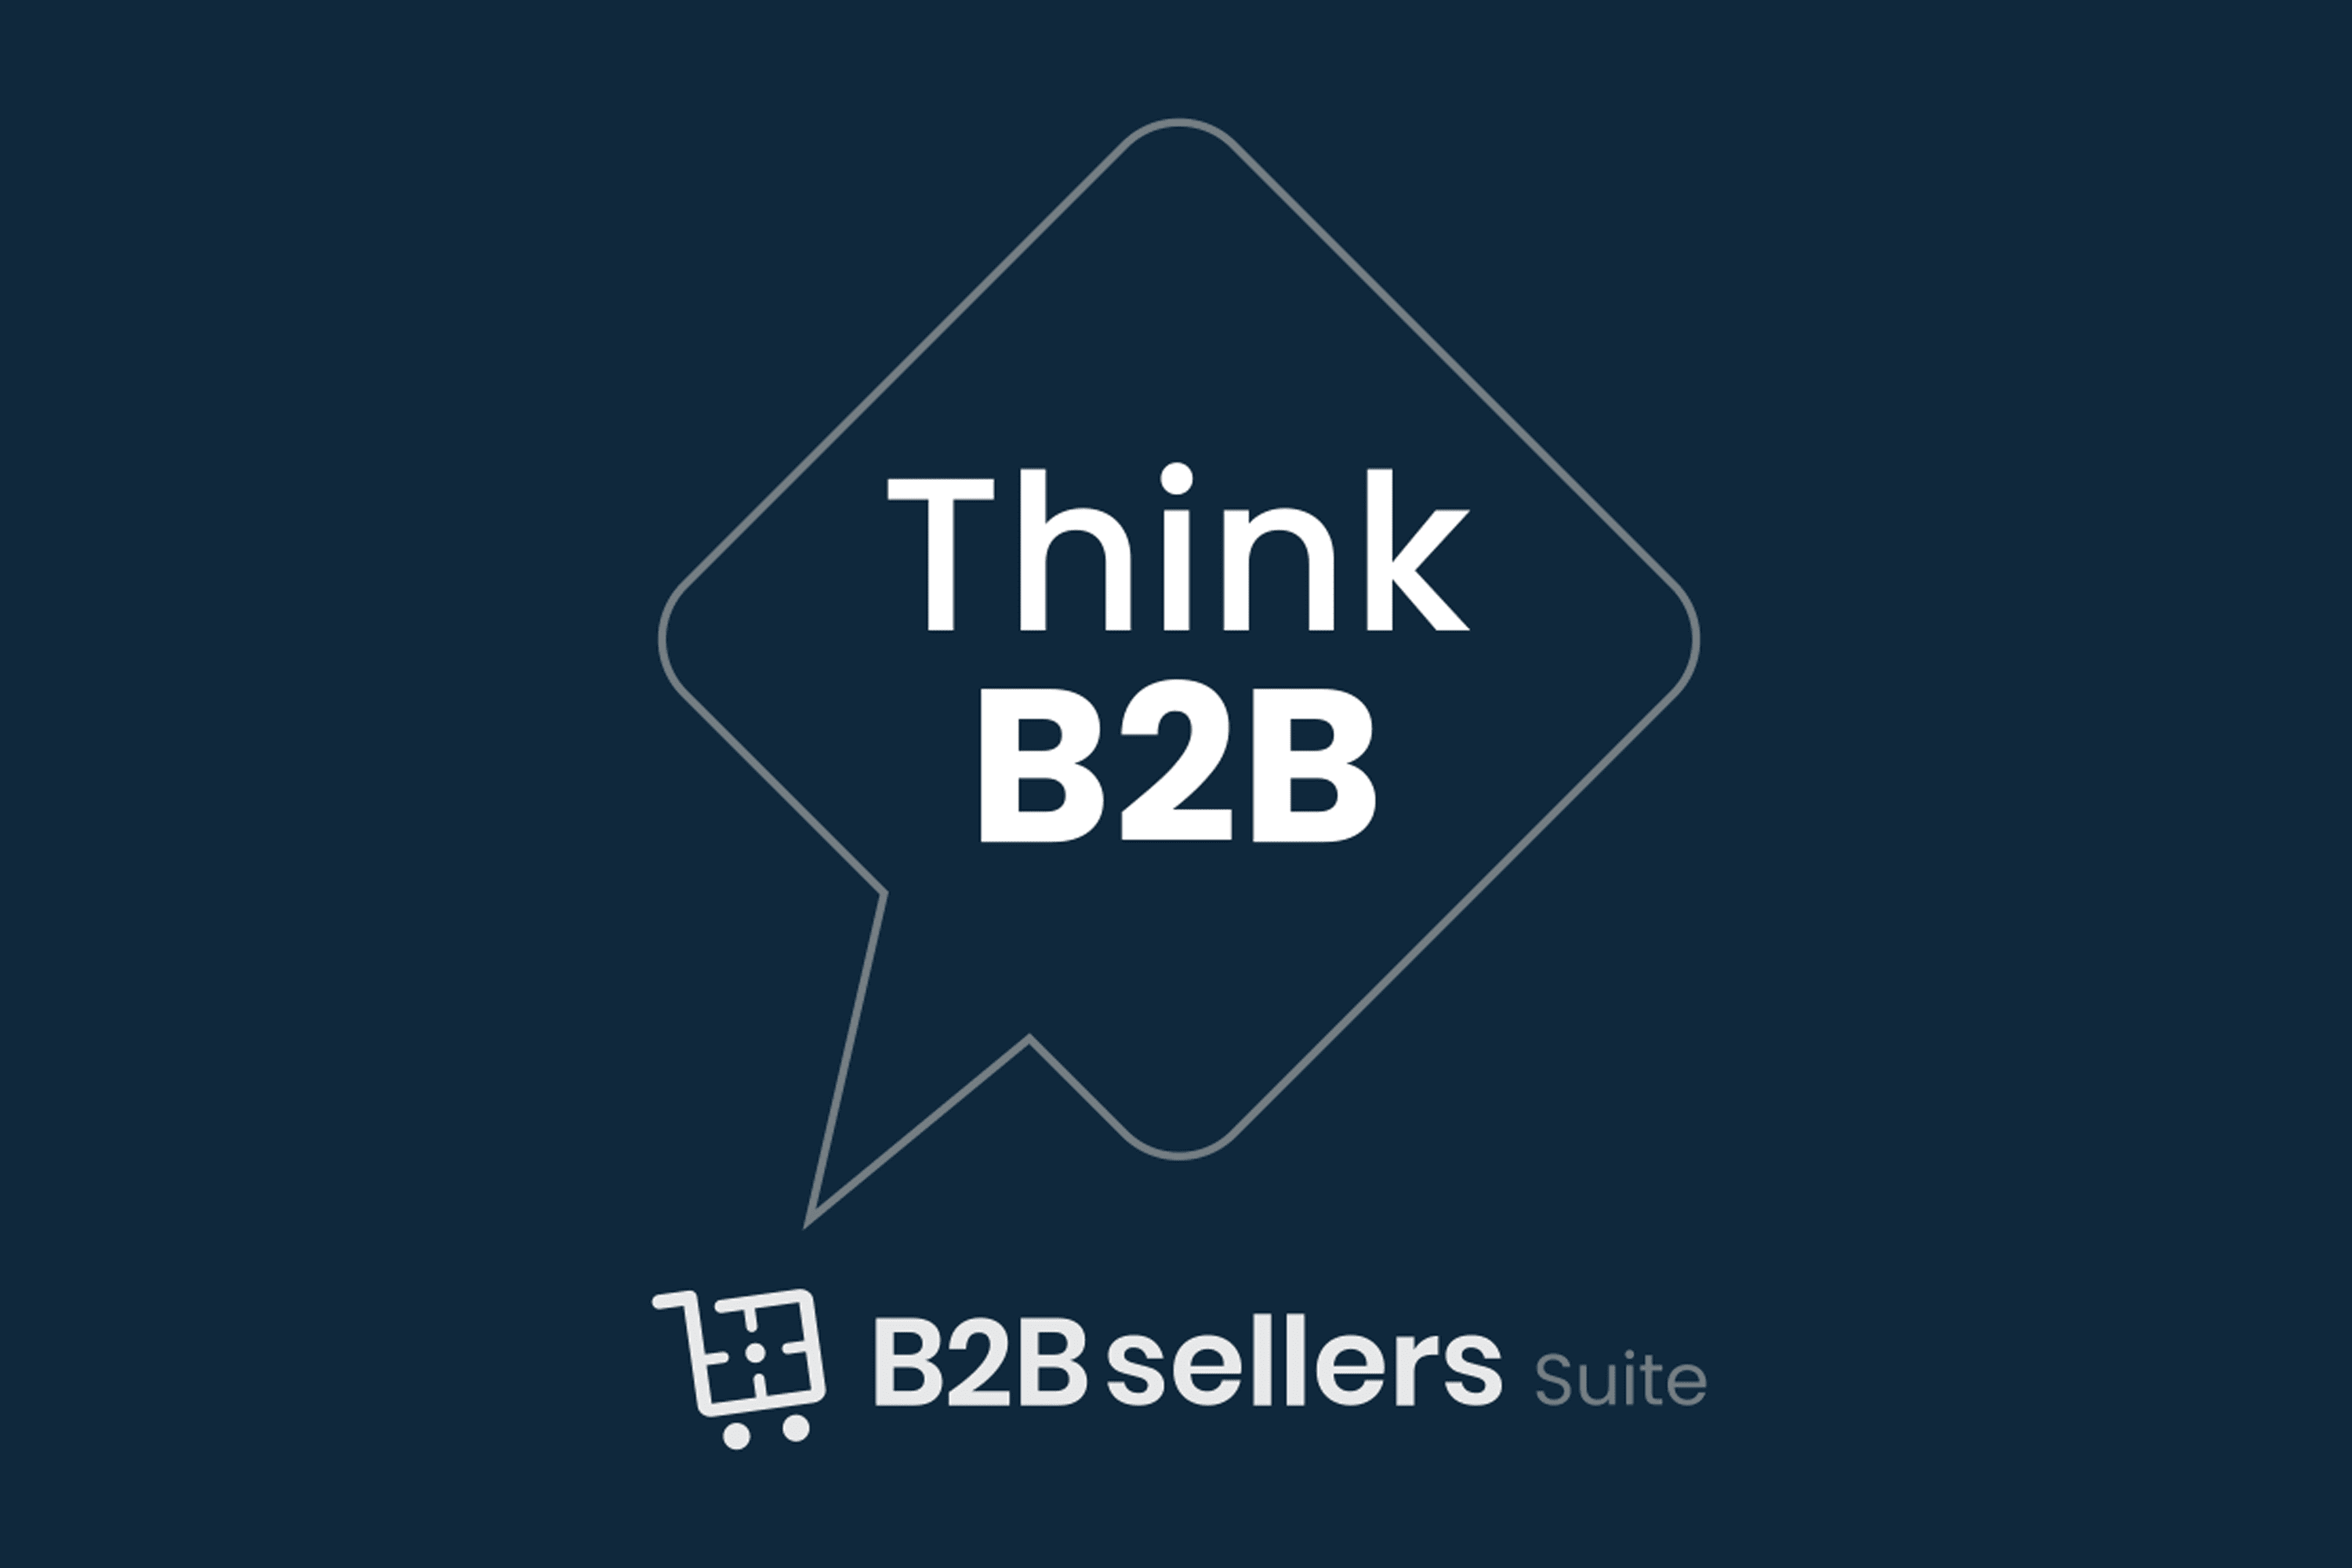 B2Bsellers-Suite - Think B2B!